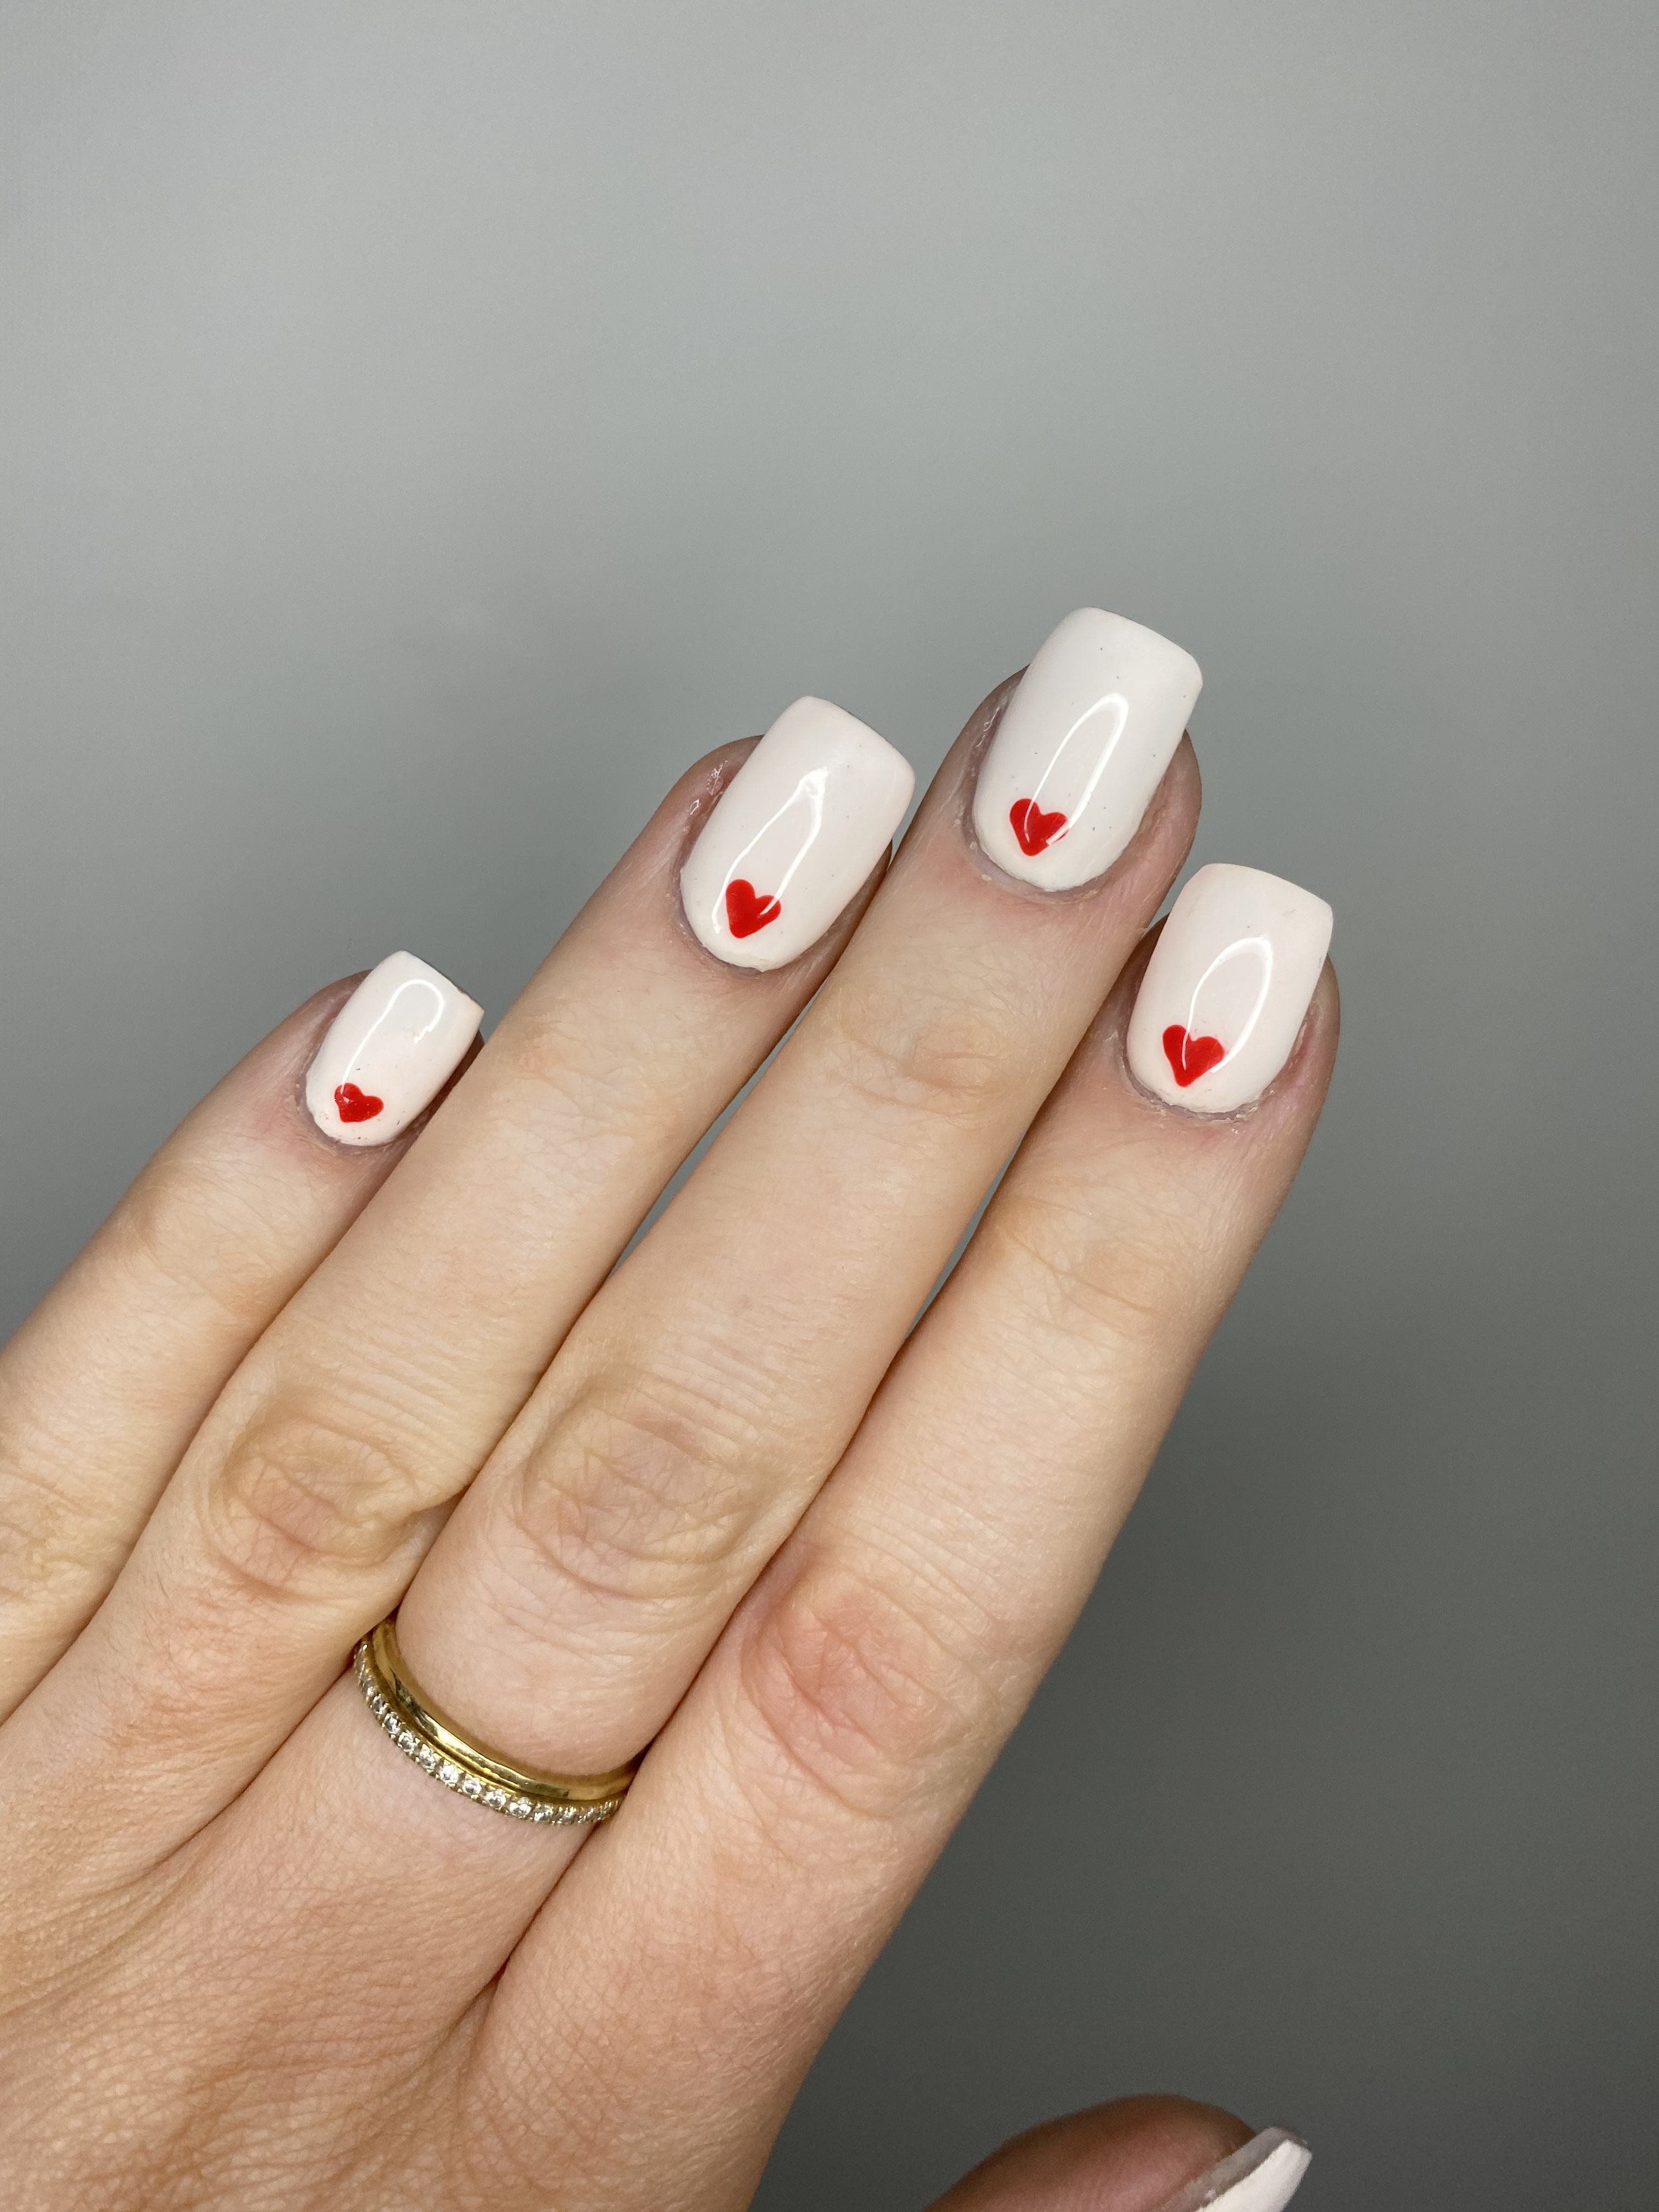 Acrylic nails with red hearts